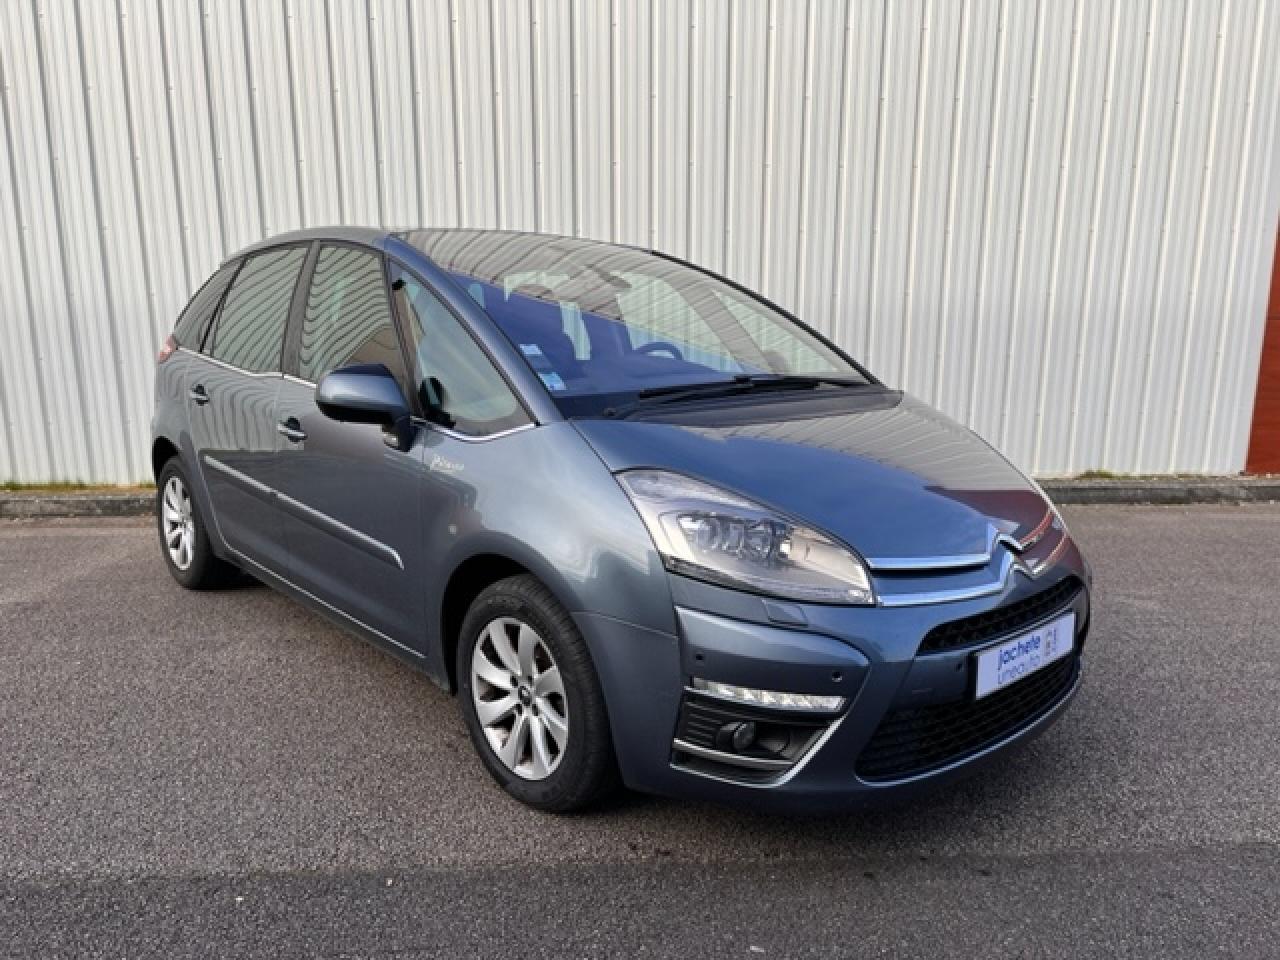  CITROEN-C4 PICASSO-2.0 HDi 150 Exclusive GPS + ATTELAGE